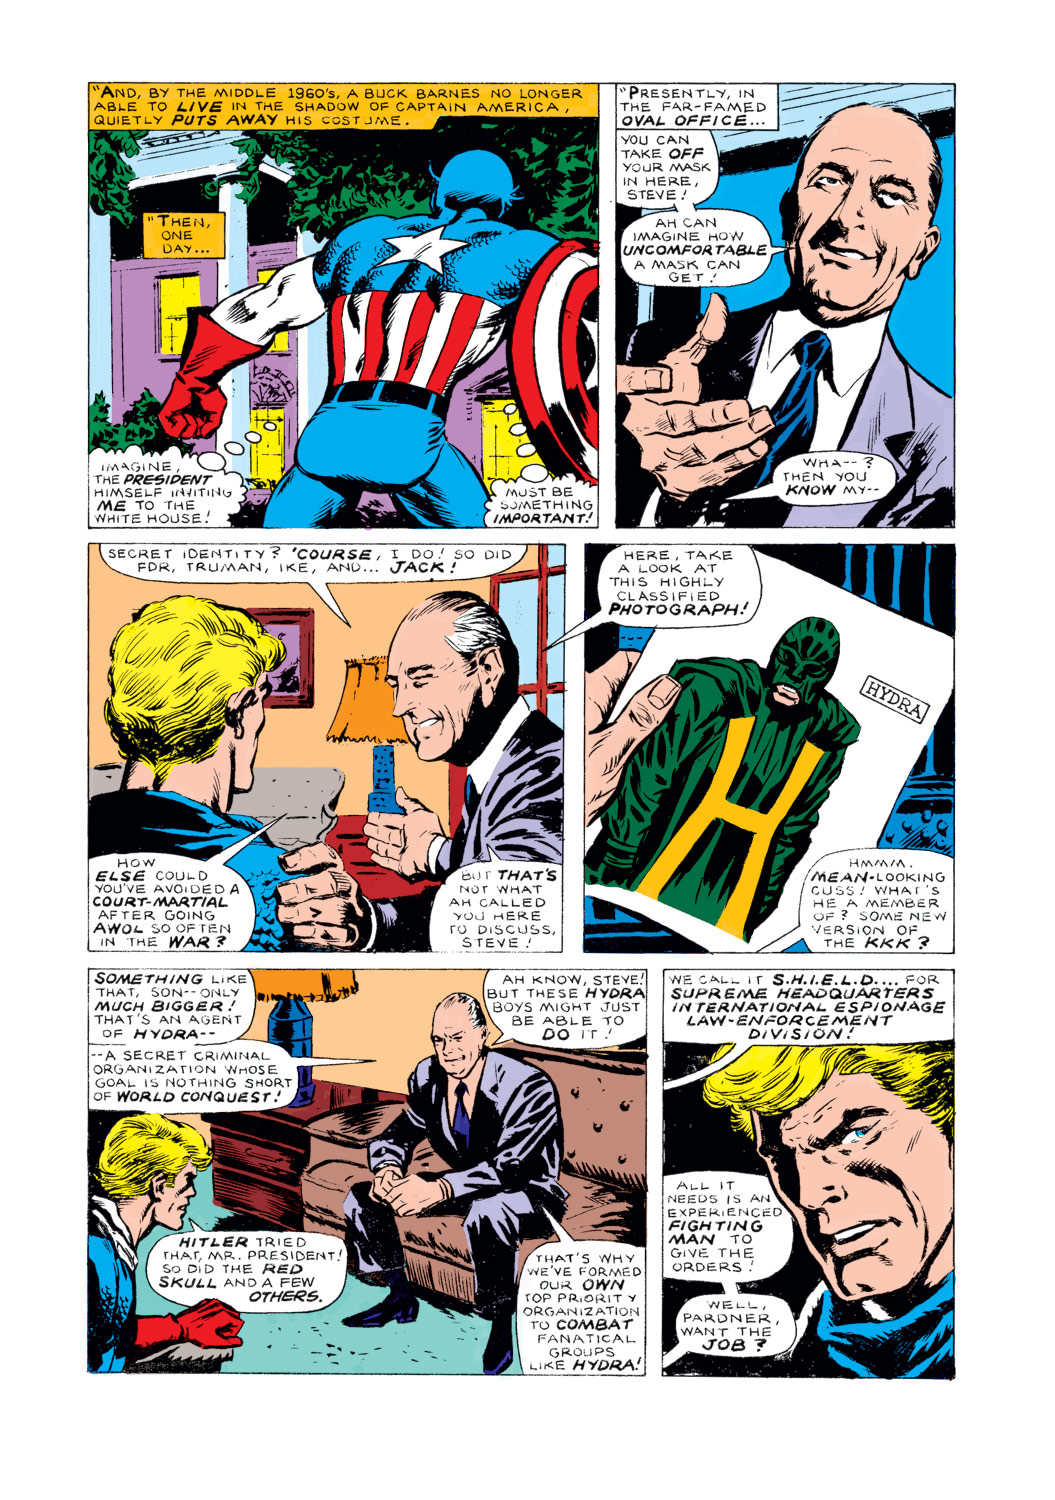 What If? (1977) issue 5 - Captain America hadn't vanished during World War Two - Page 13